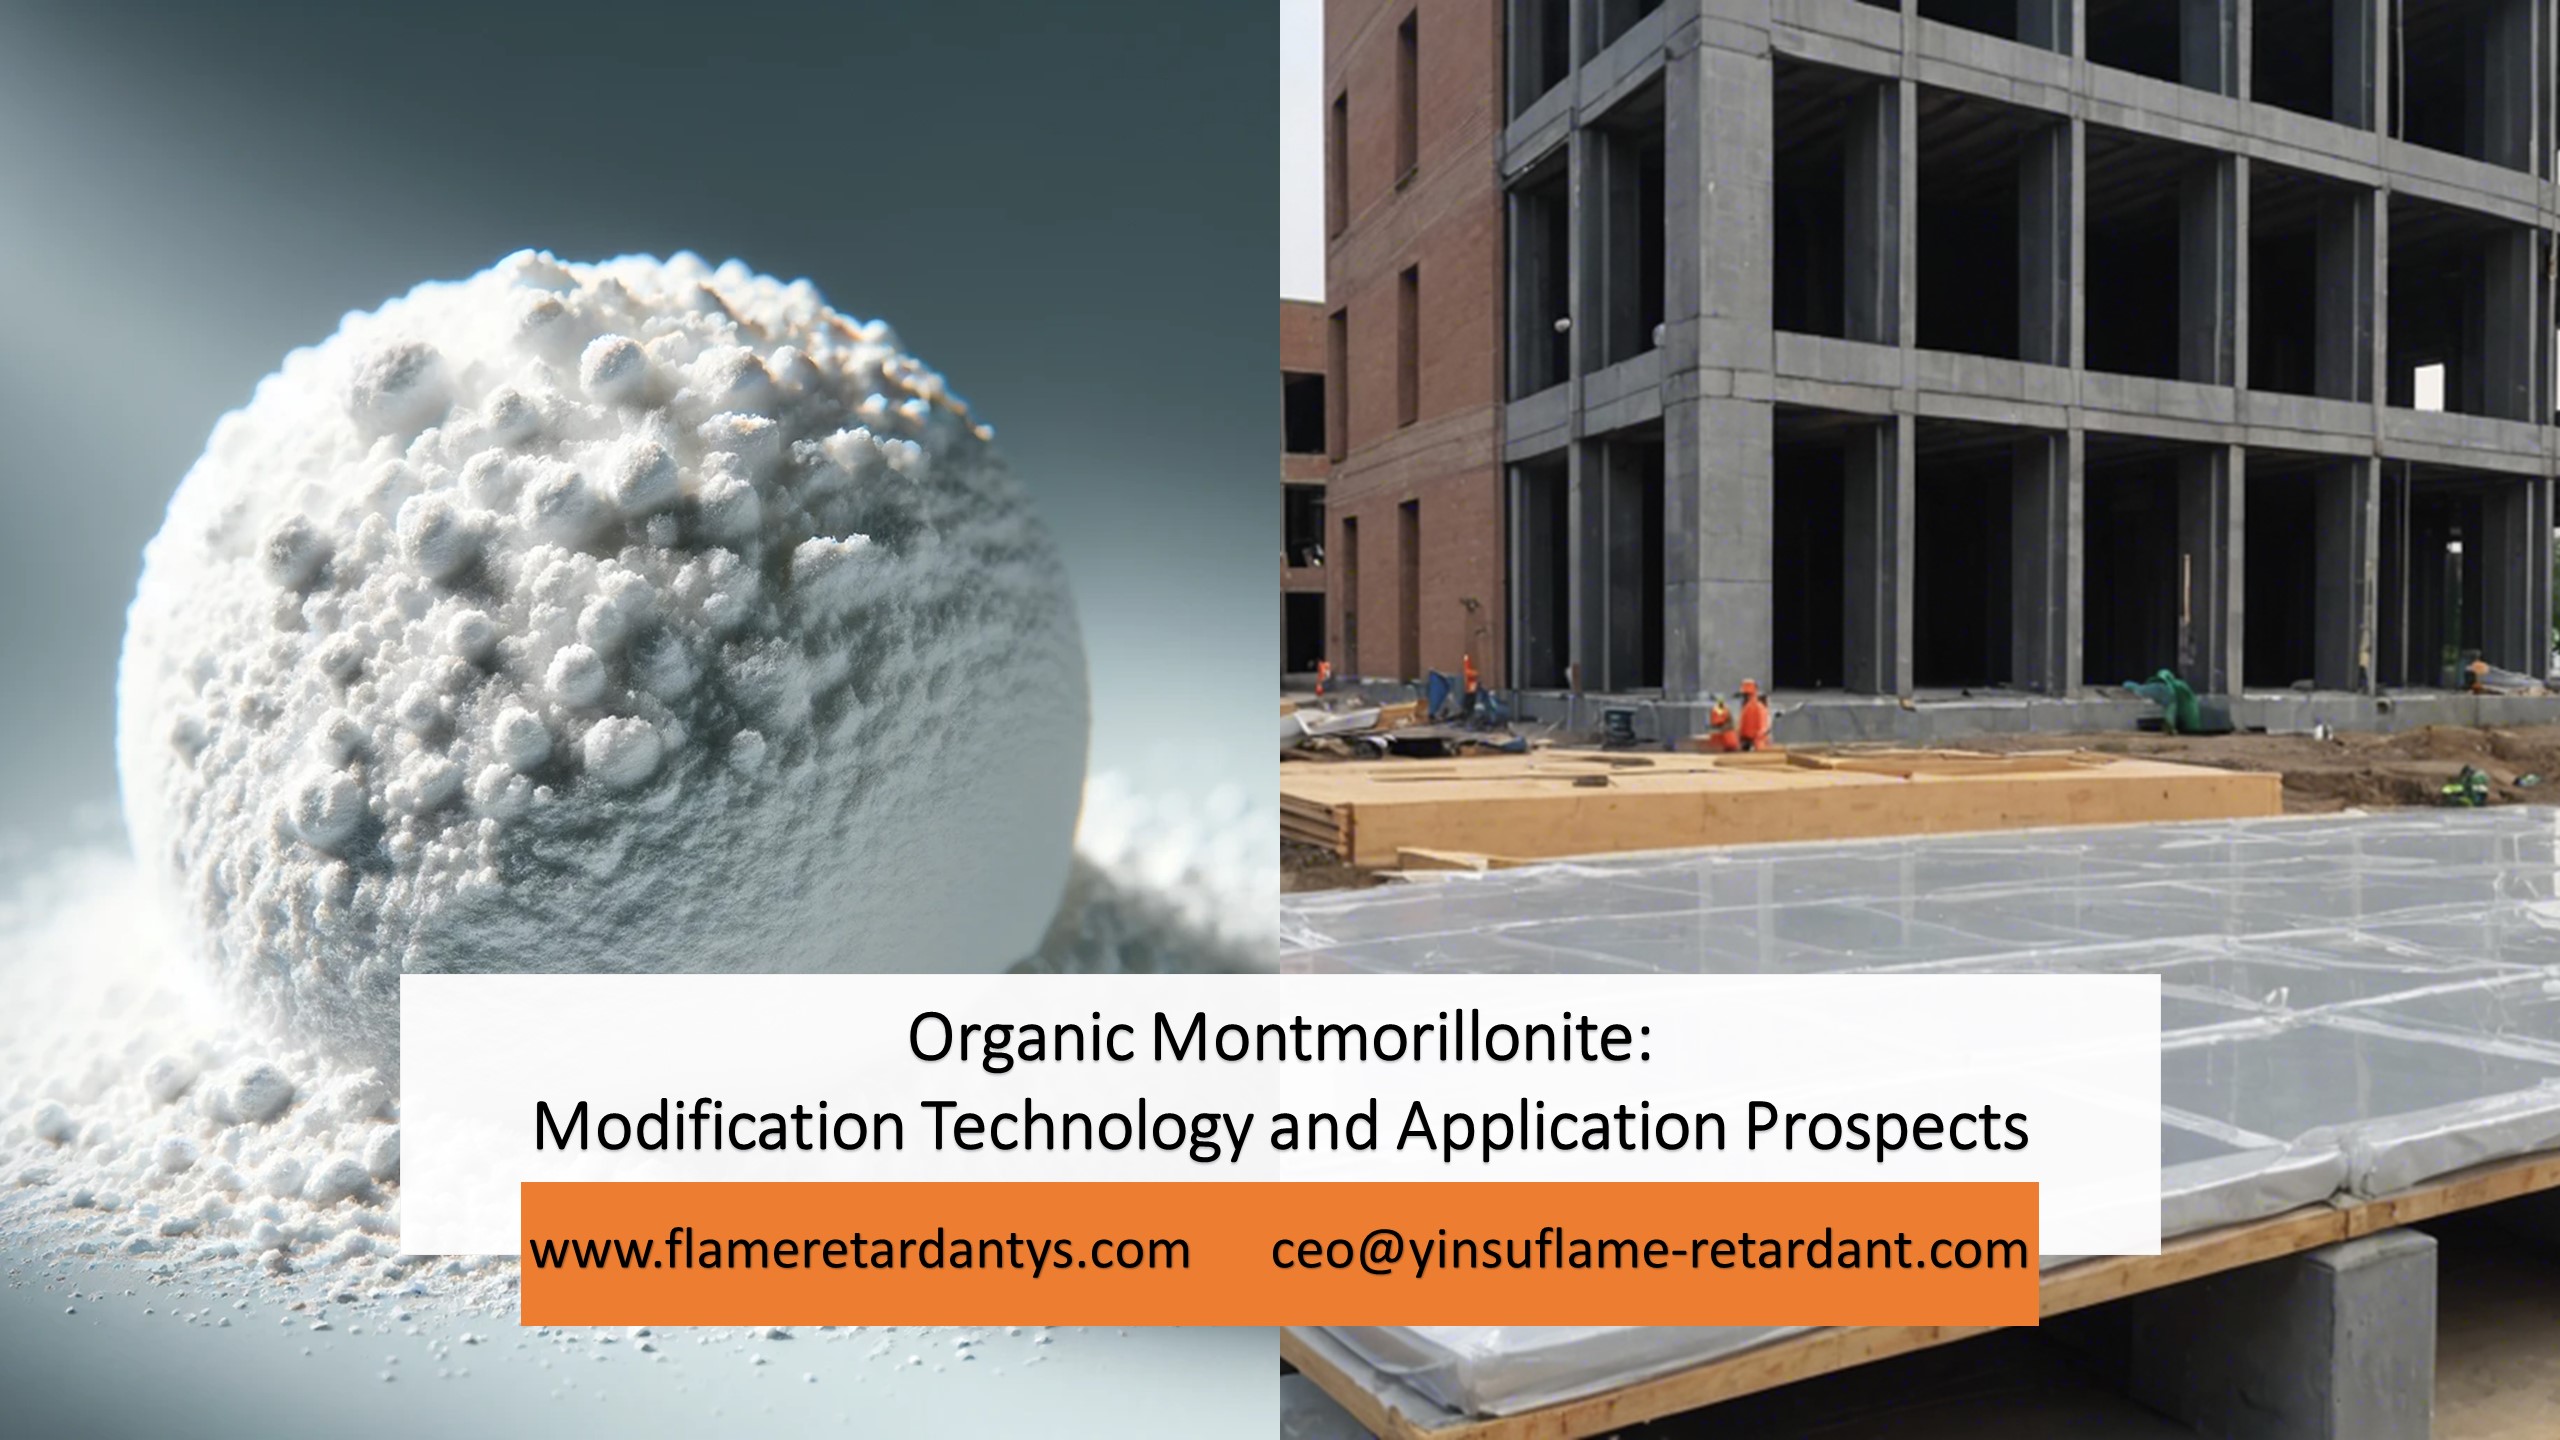 5.9 Organic Montmorillonite Modification Technology and Application Prospects